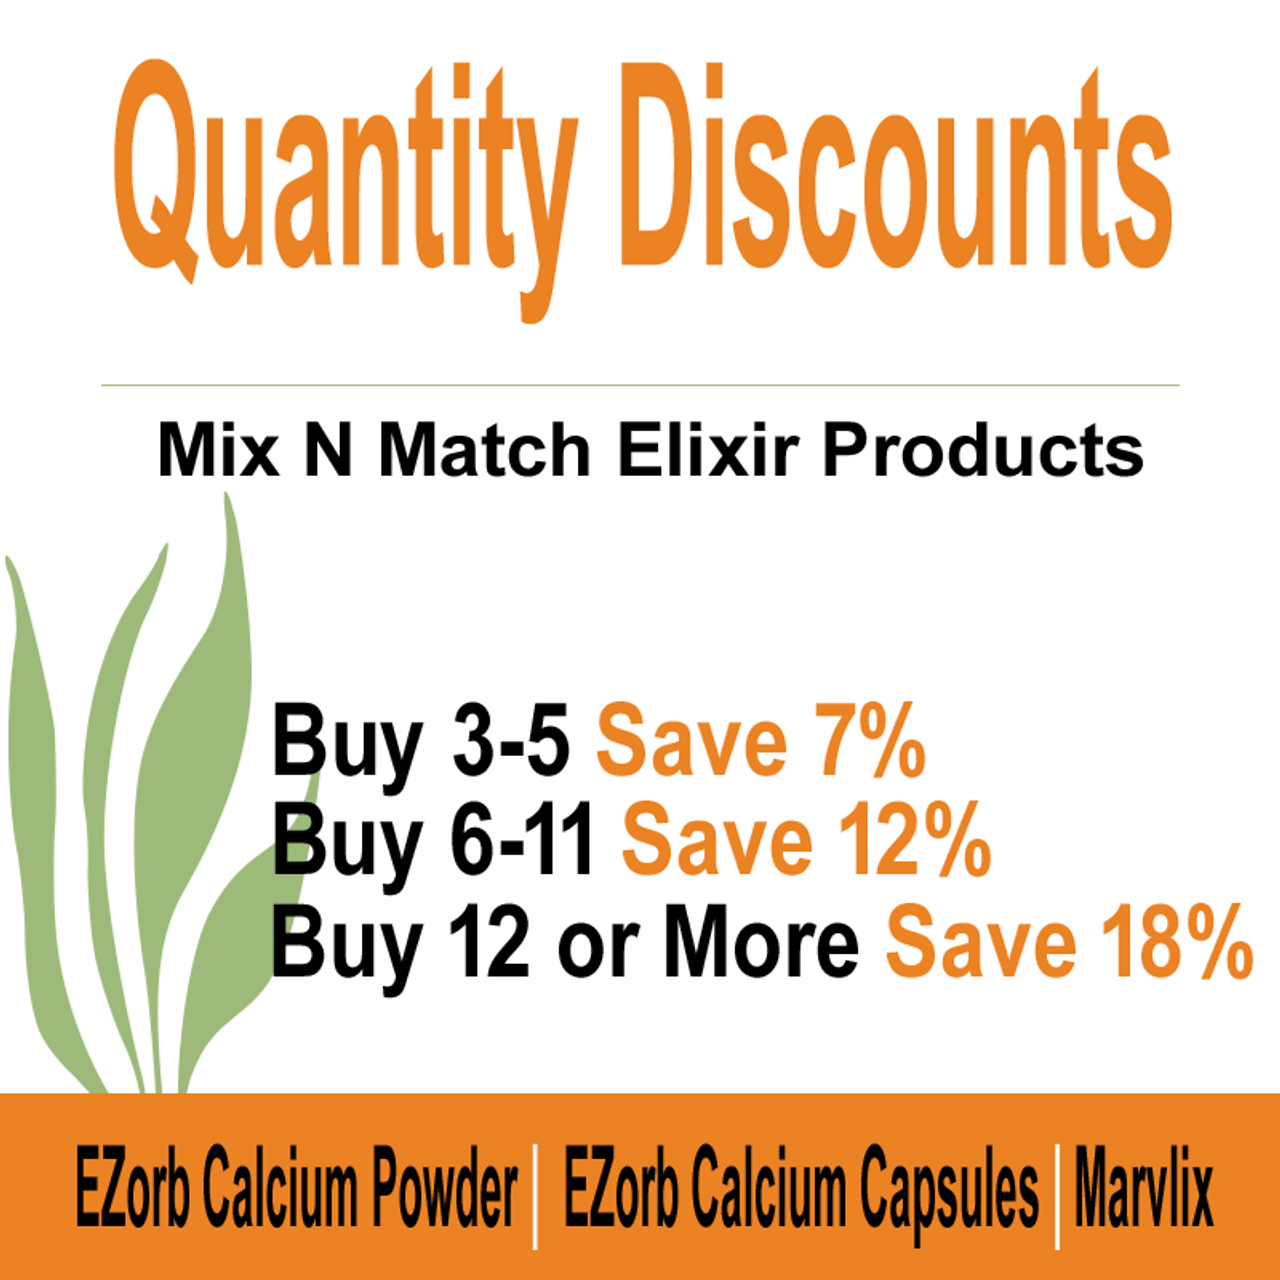 Elixir Industry Quantity Discounts. Mix N Match Elixir Industry Products for up to 18% off. Buy EZorb Calcium Capsules, EZorb Calcium Powder,  and Marvlix with Cordyceps Sinensis